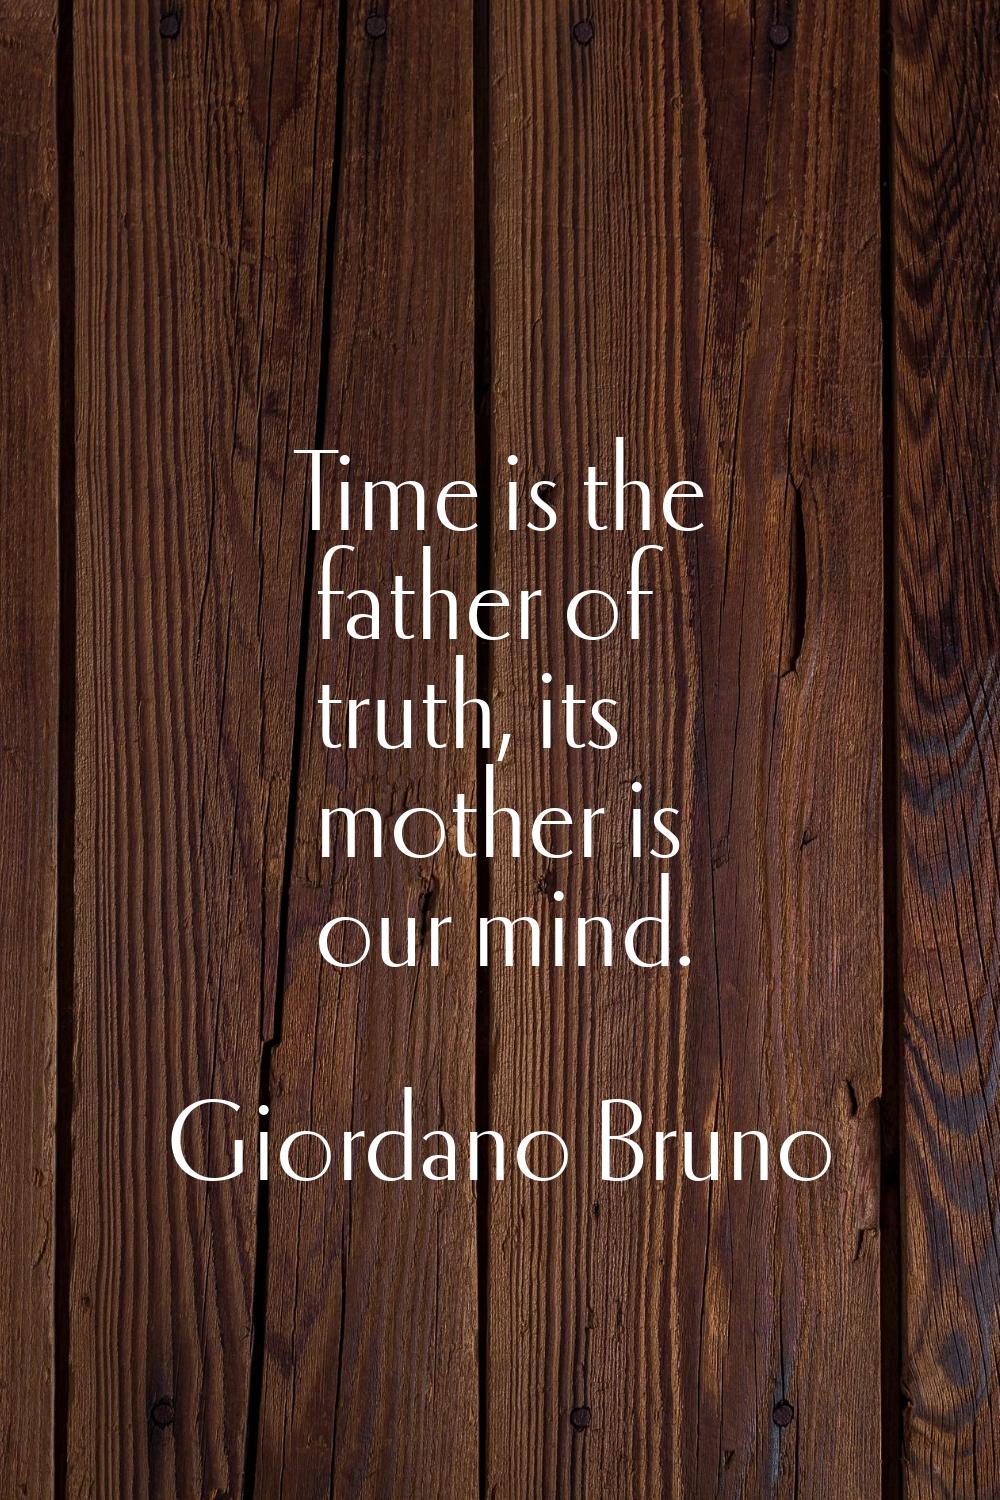 Time is the father of truth, its mother is our mind.